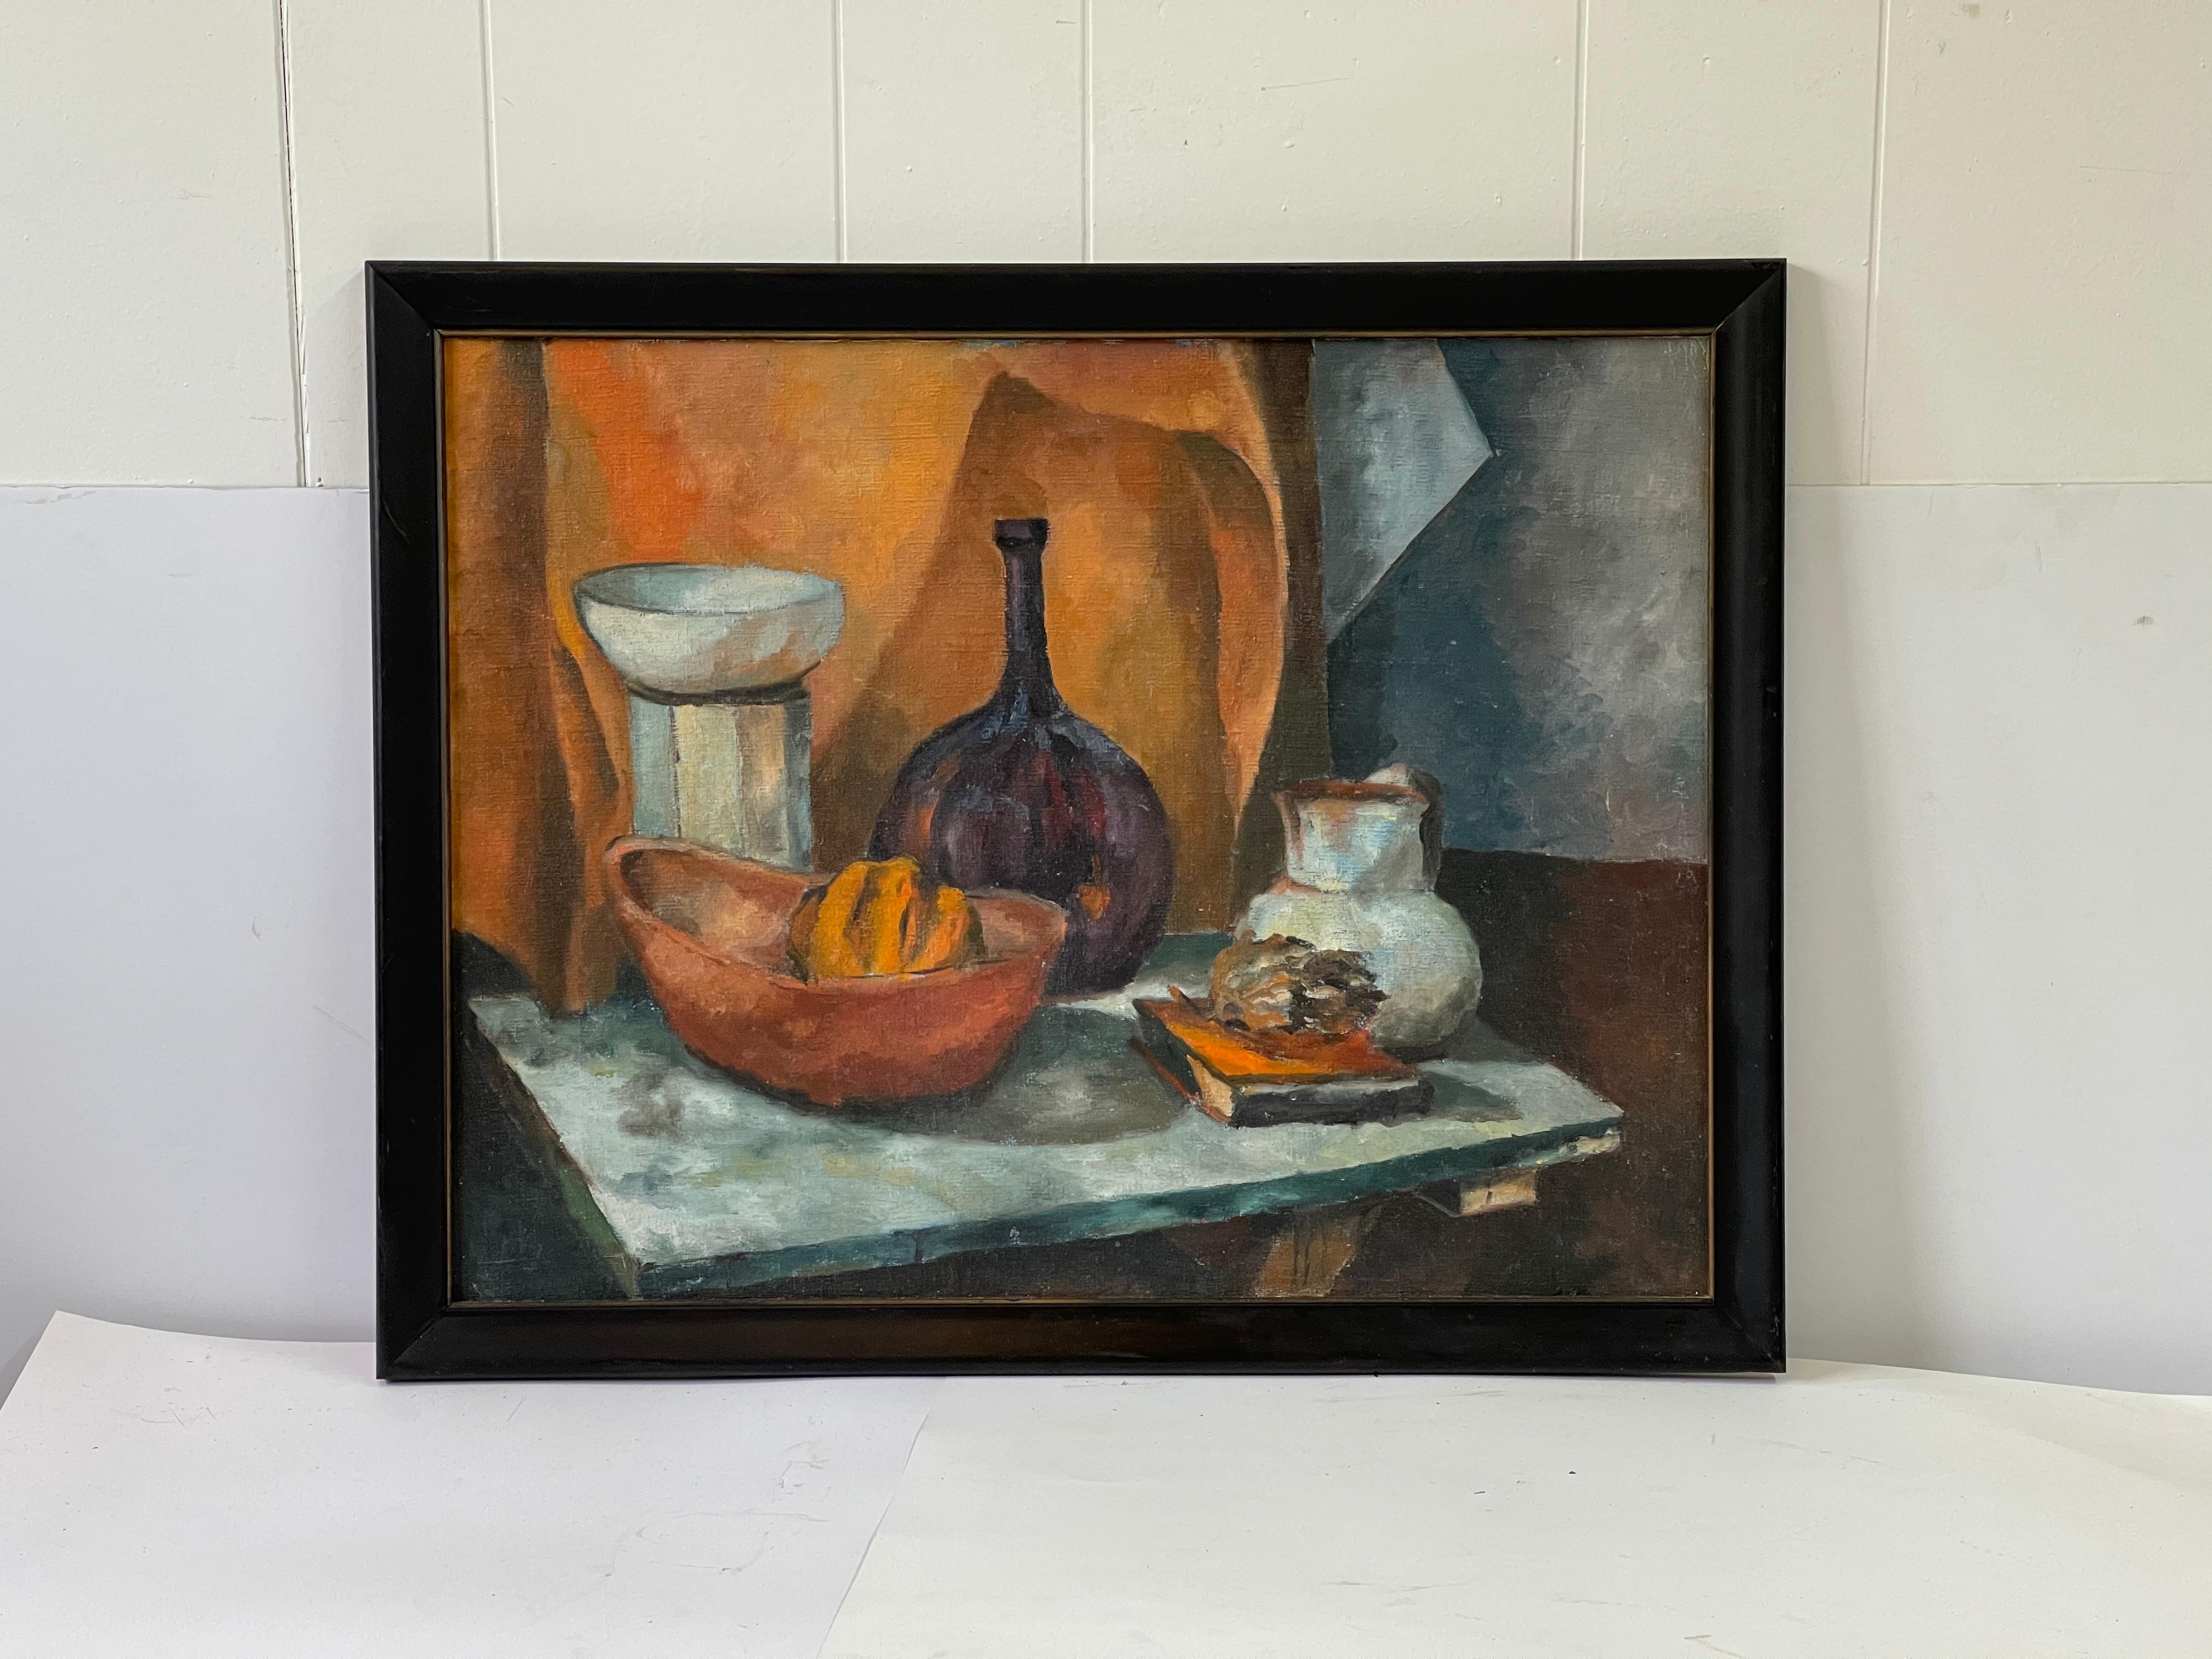 Midcentury still life oil on board painting of a tabletop. Among the vases, there is a bowl holding a squash and an artichoke stacked on top of books. Hues of purple and white pop against an orange backdrop of textiles. Unsigned.